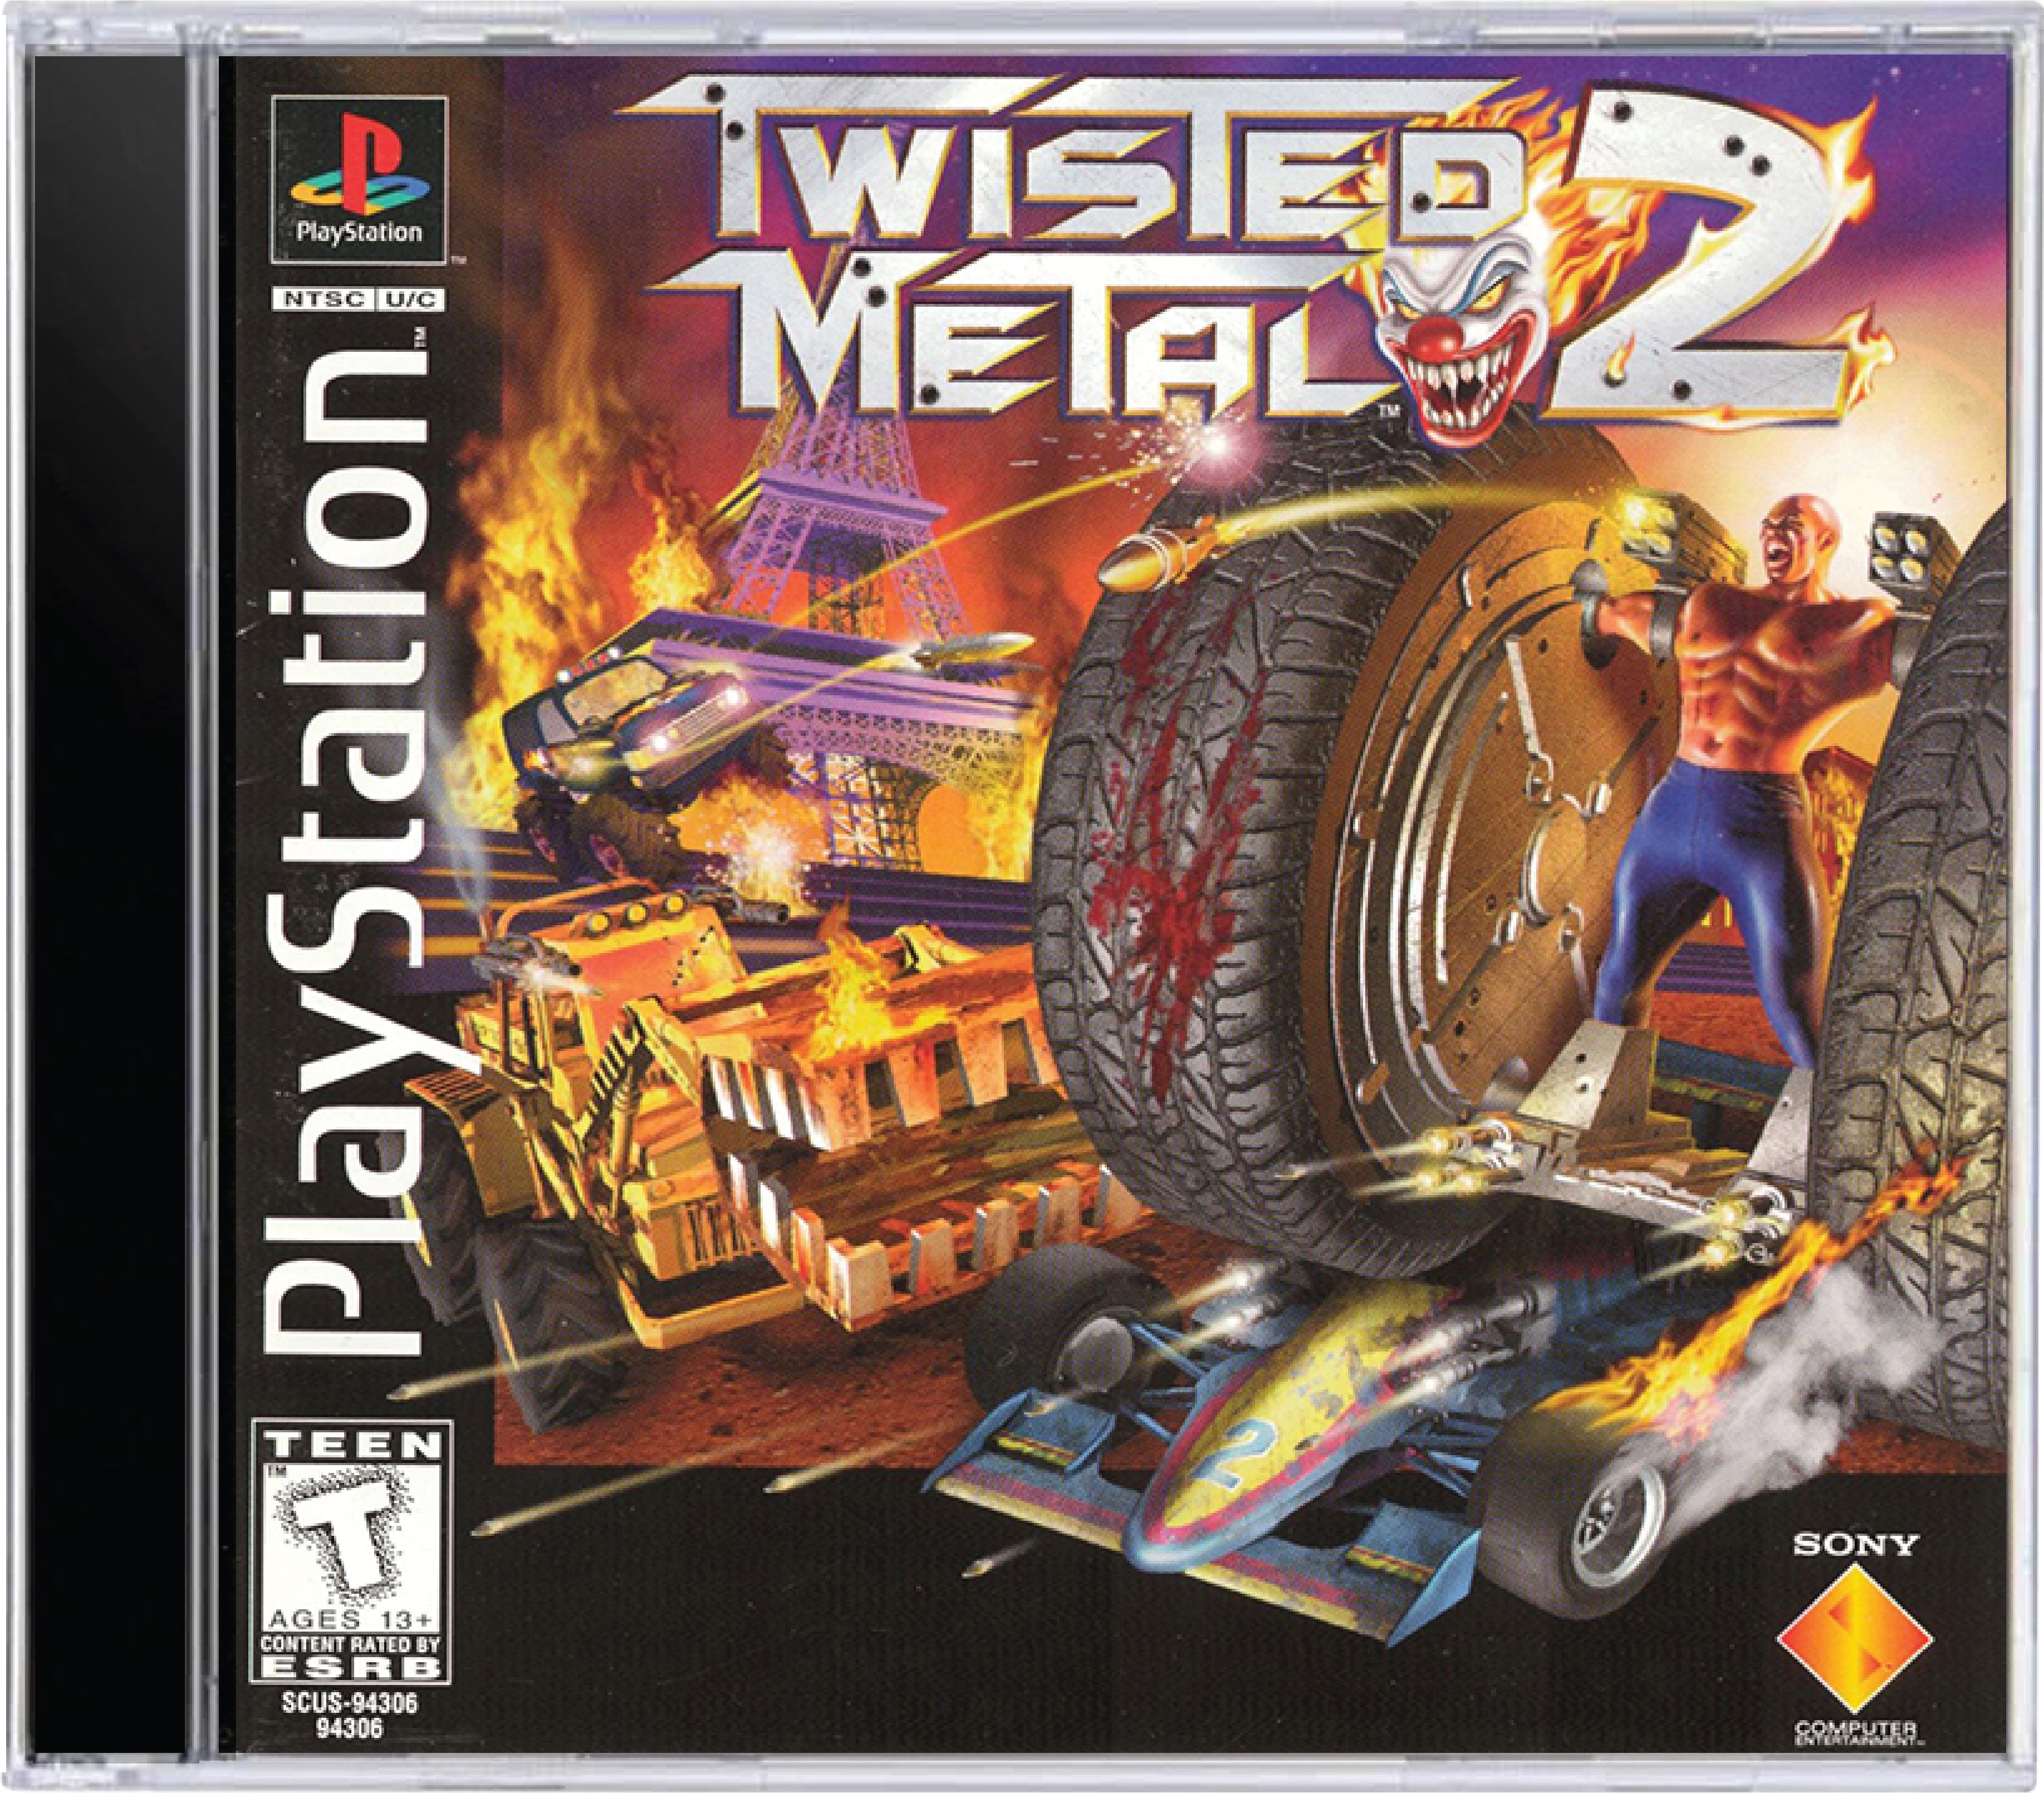 Twisted Metal 4 Greatest Hits Sony Playstation 1 PS1 MINT condition  COMPLETE! 711719456025